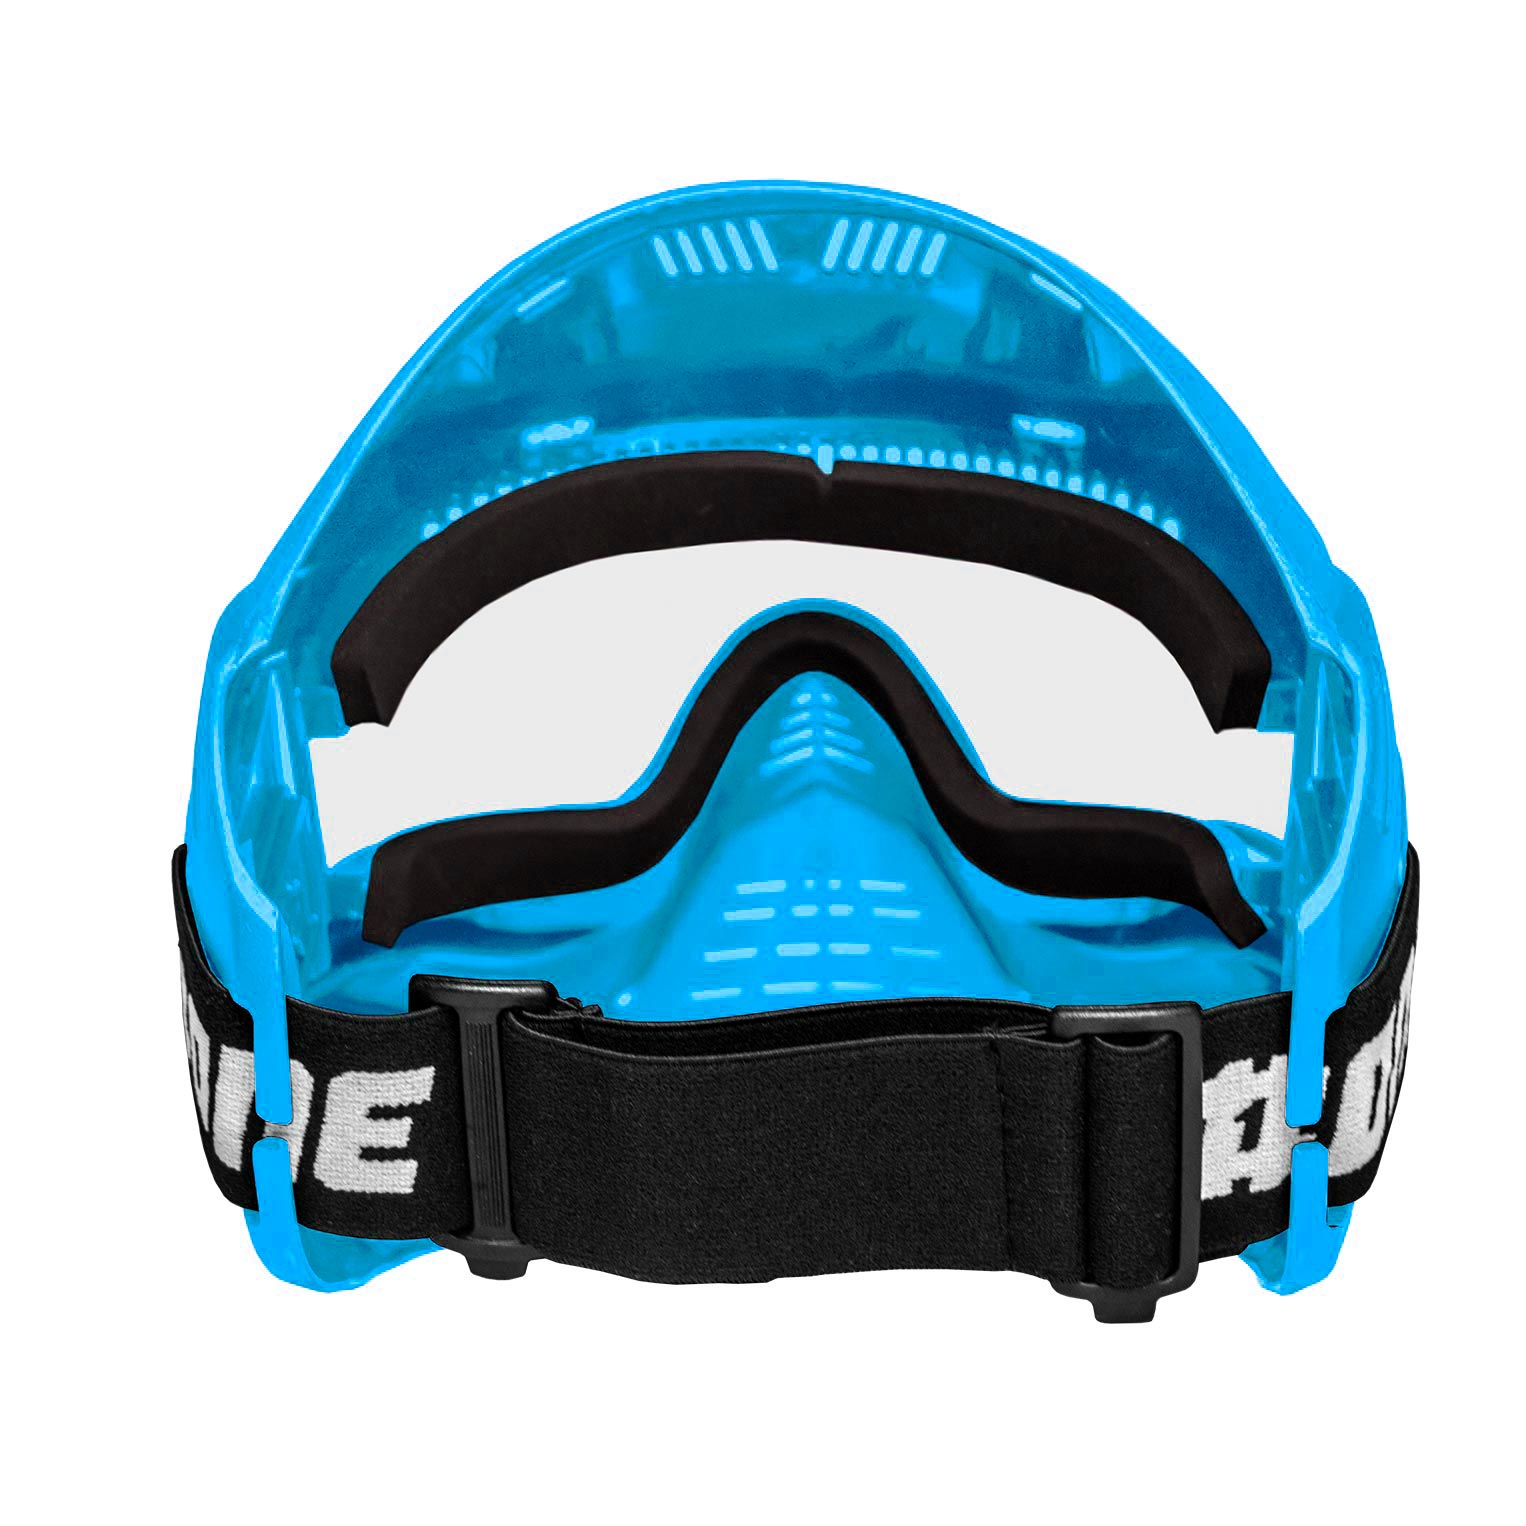 FIELDpb ONE Goggle Blue (Thermal Lens) Rubber Foam